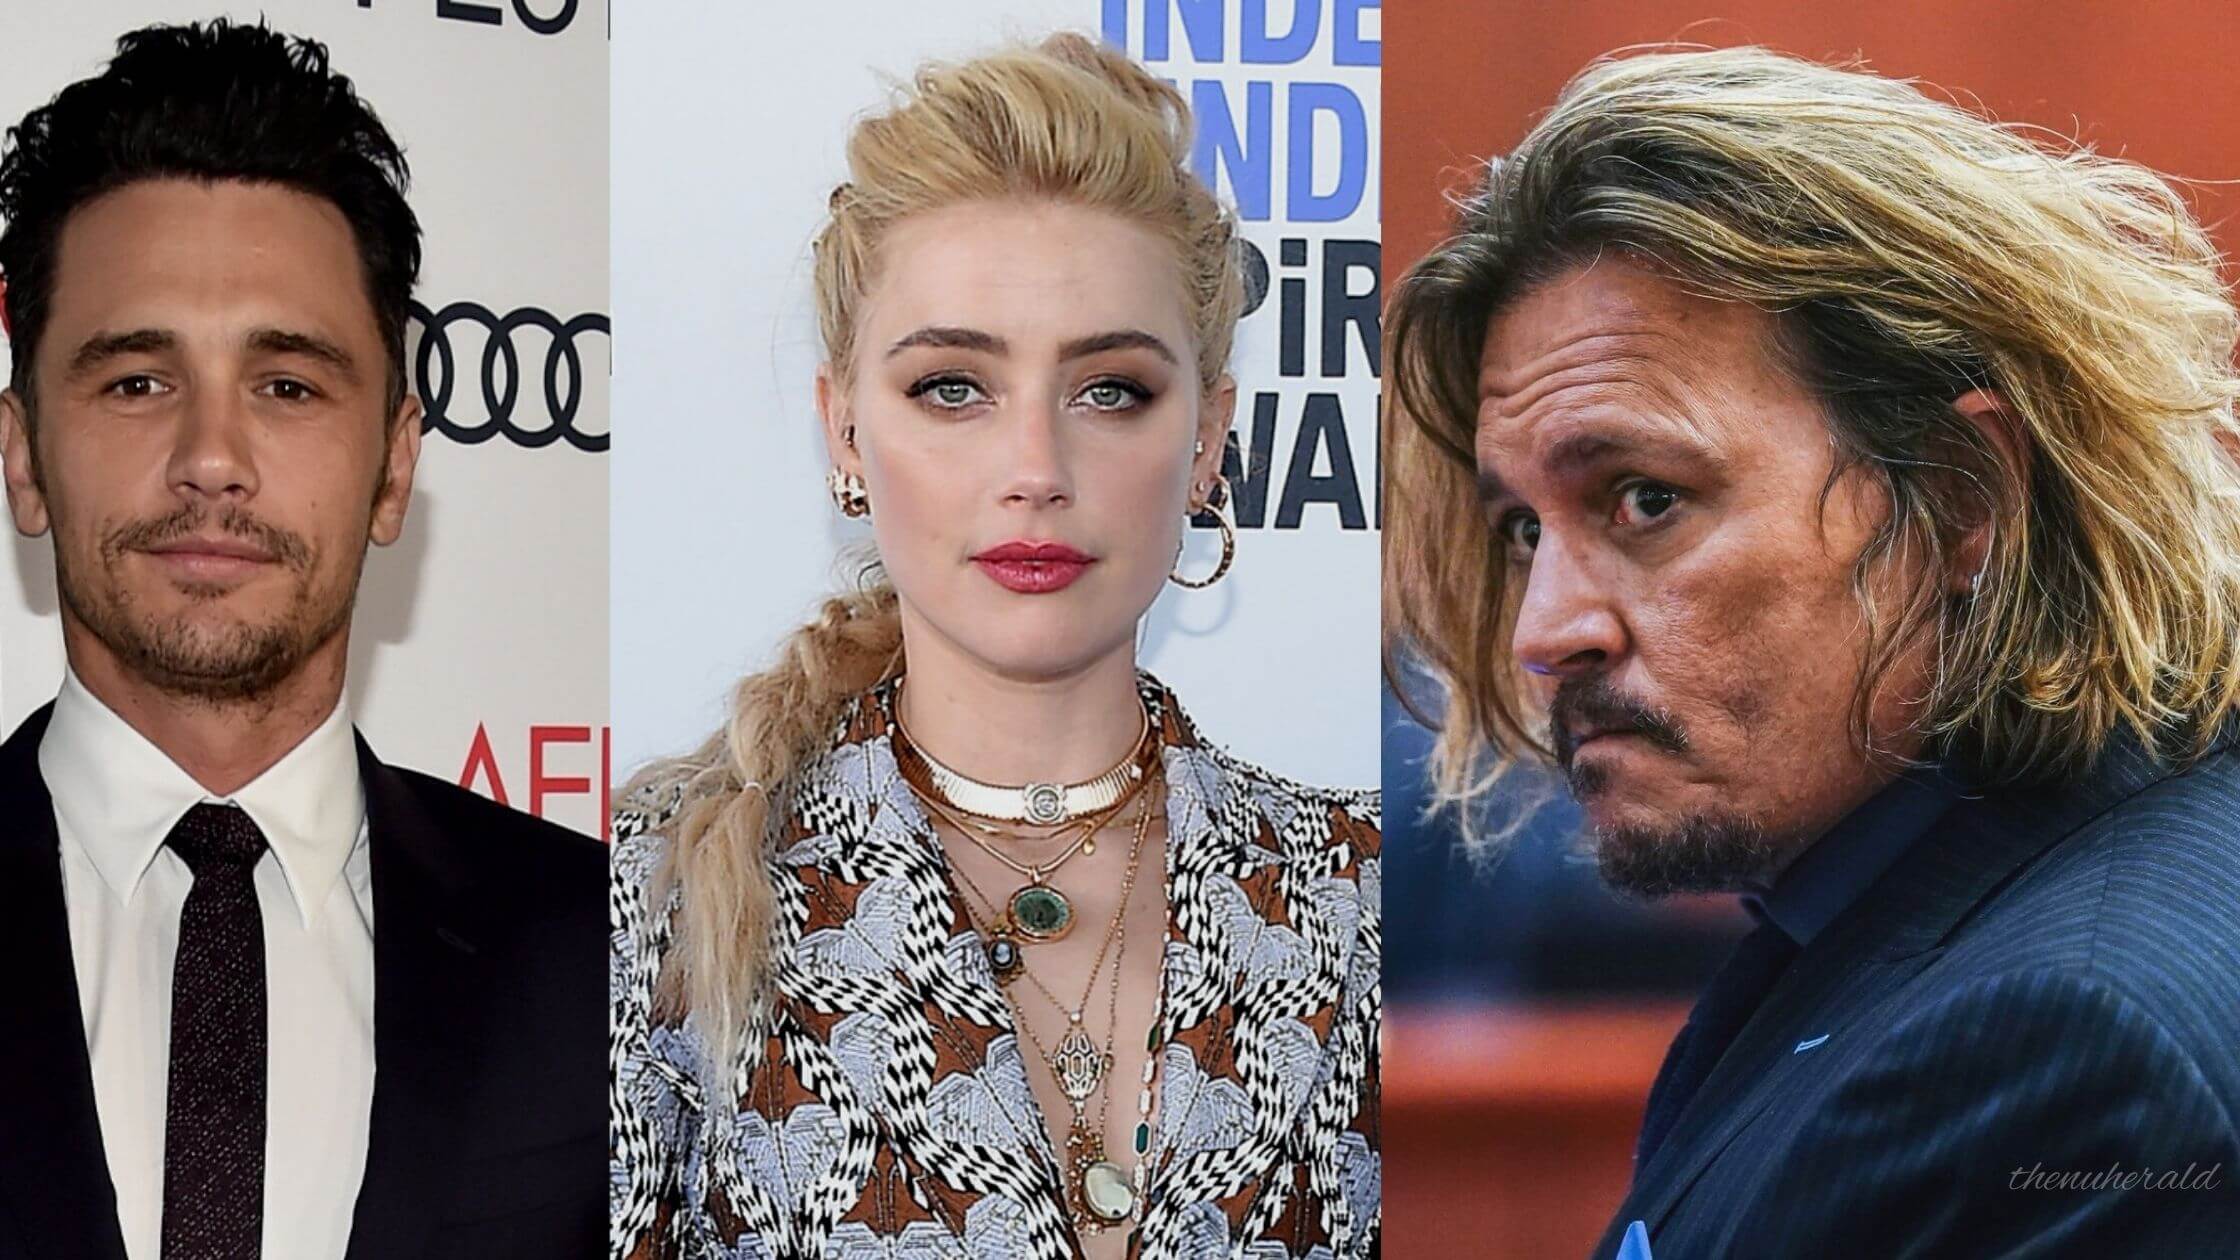 Amber Heard Confirms James Franco's Penthouse Visit During Johnny Depp's Trial